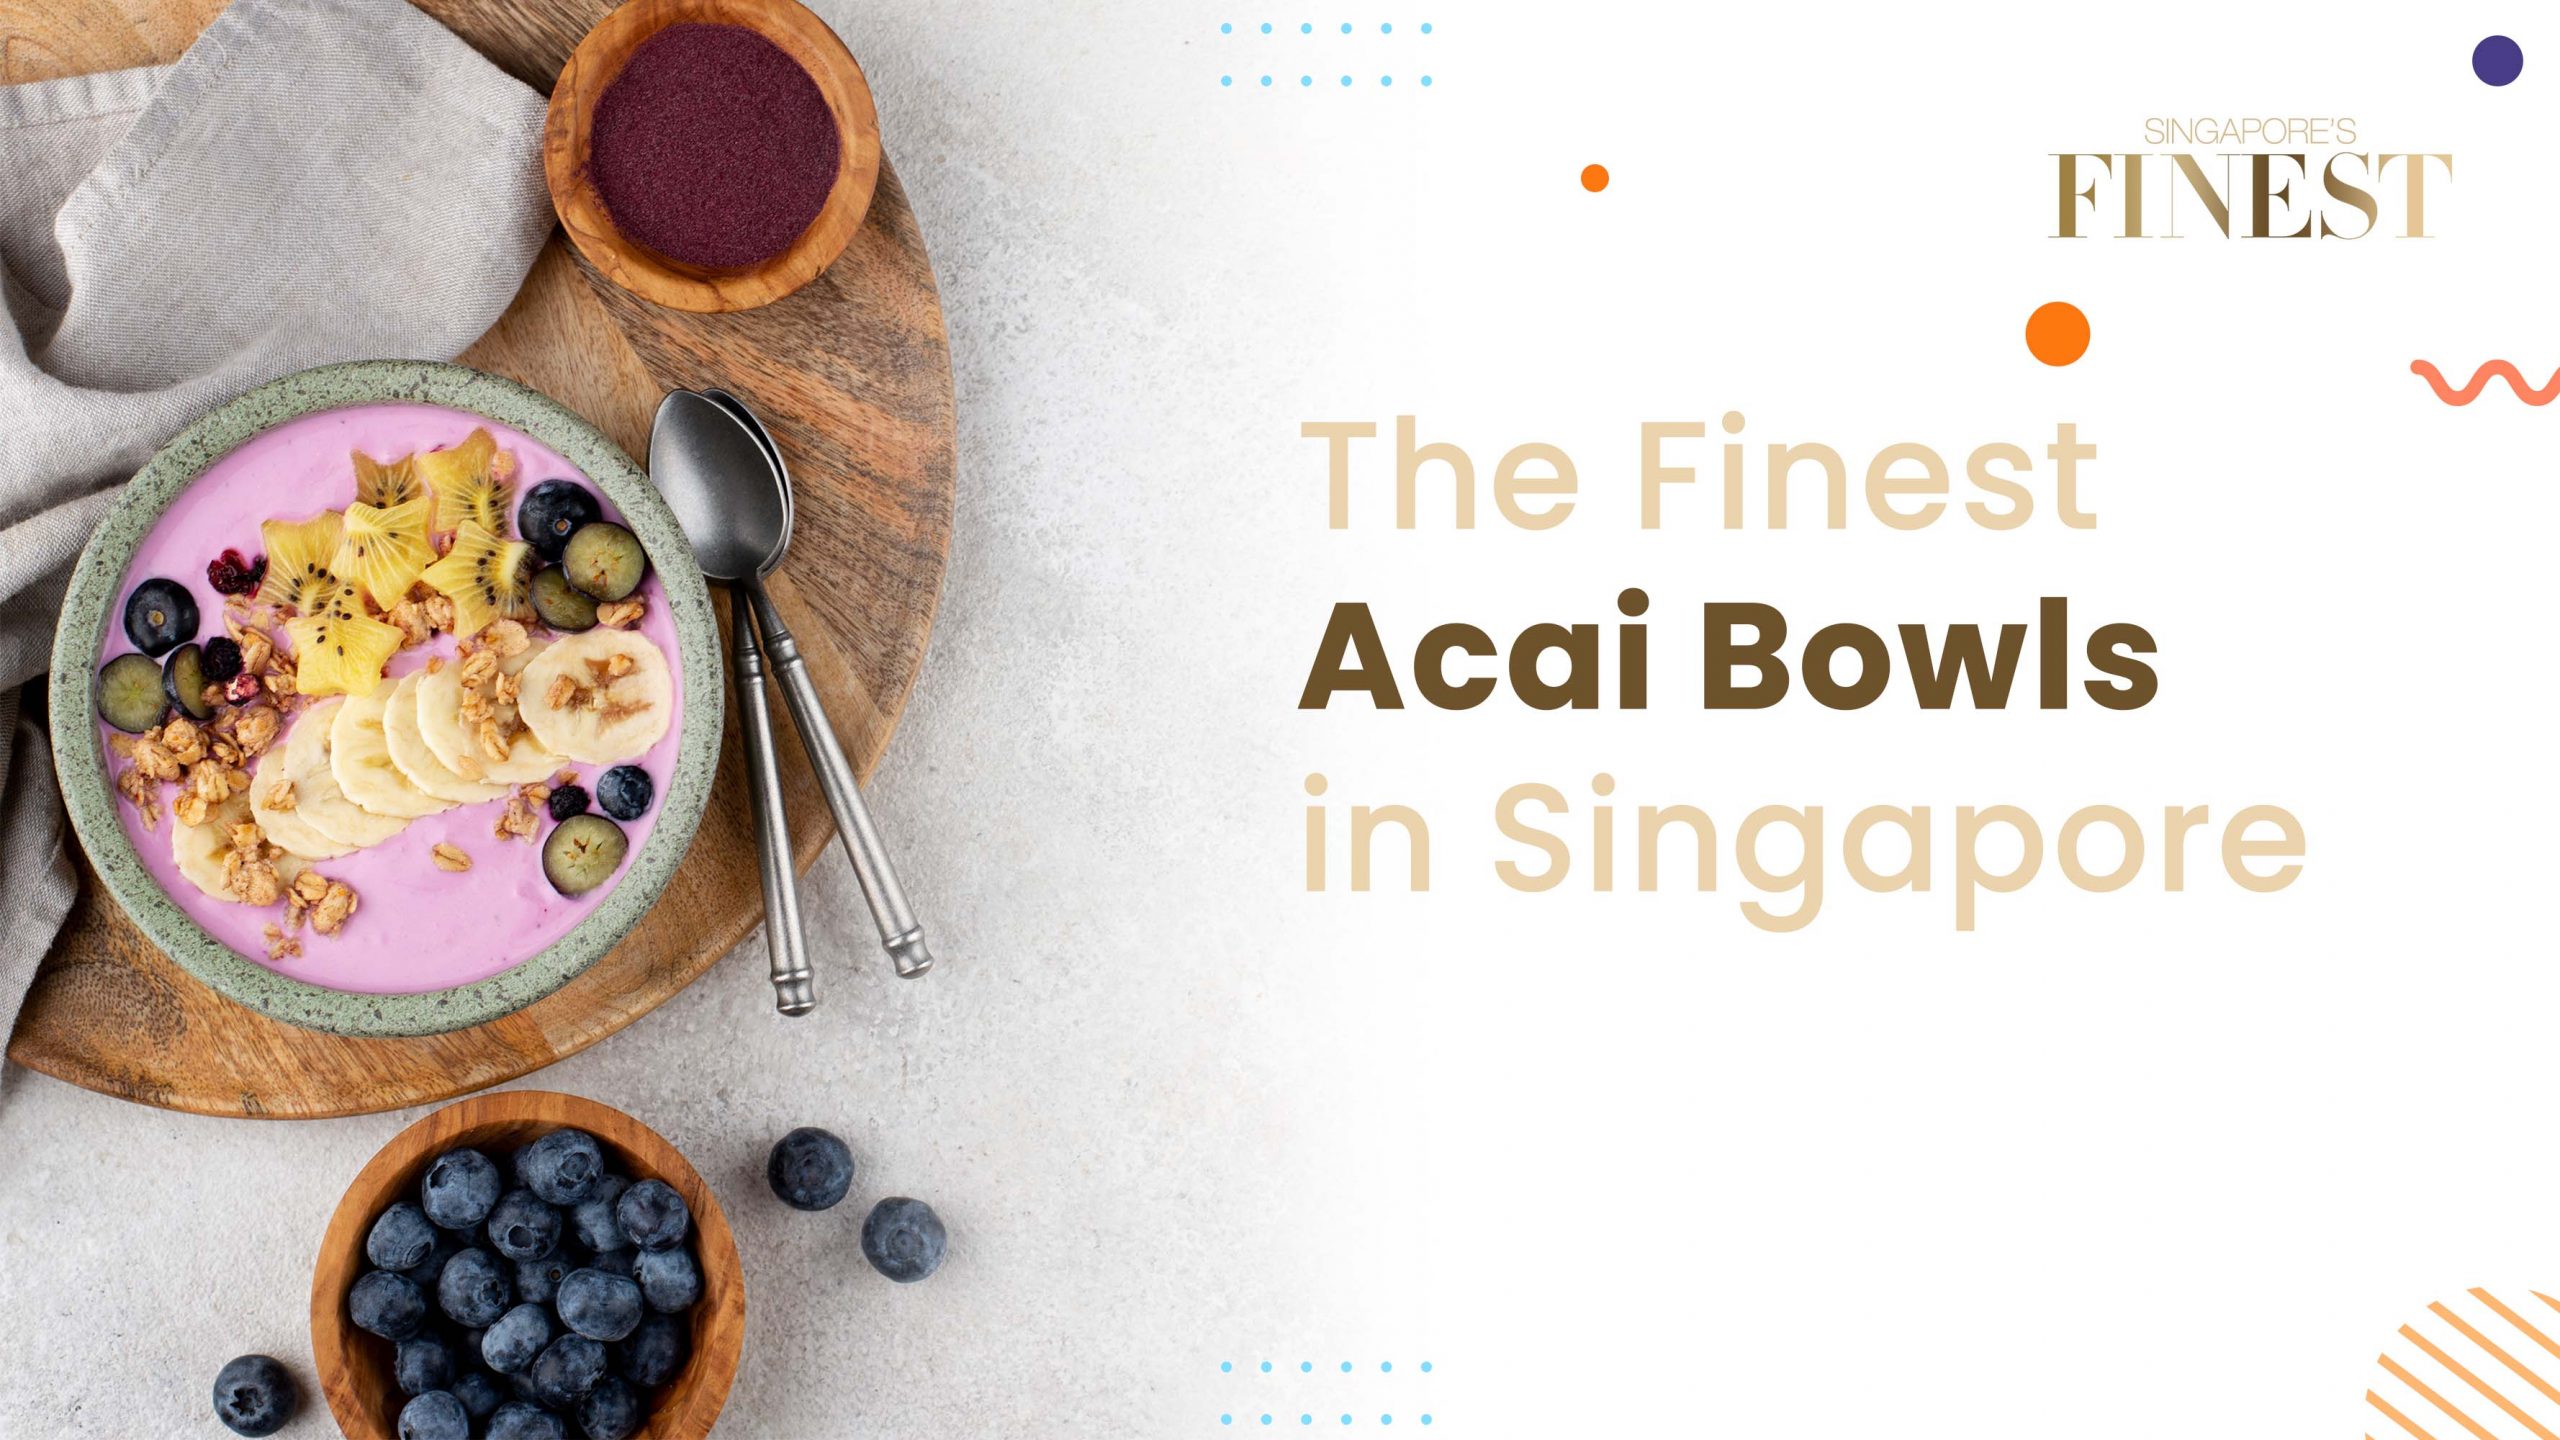 Finest Acai Bowls in Singapore